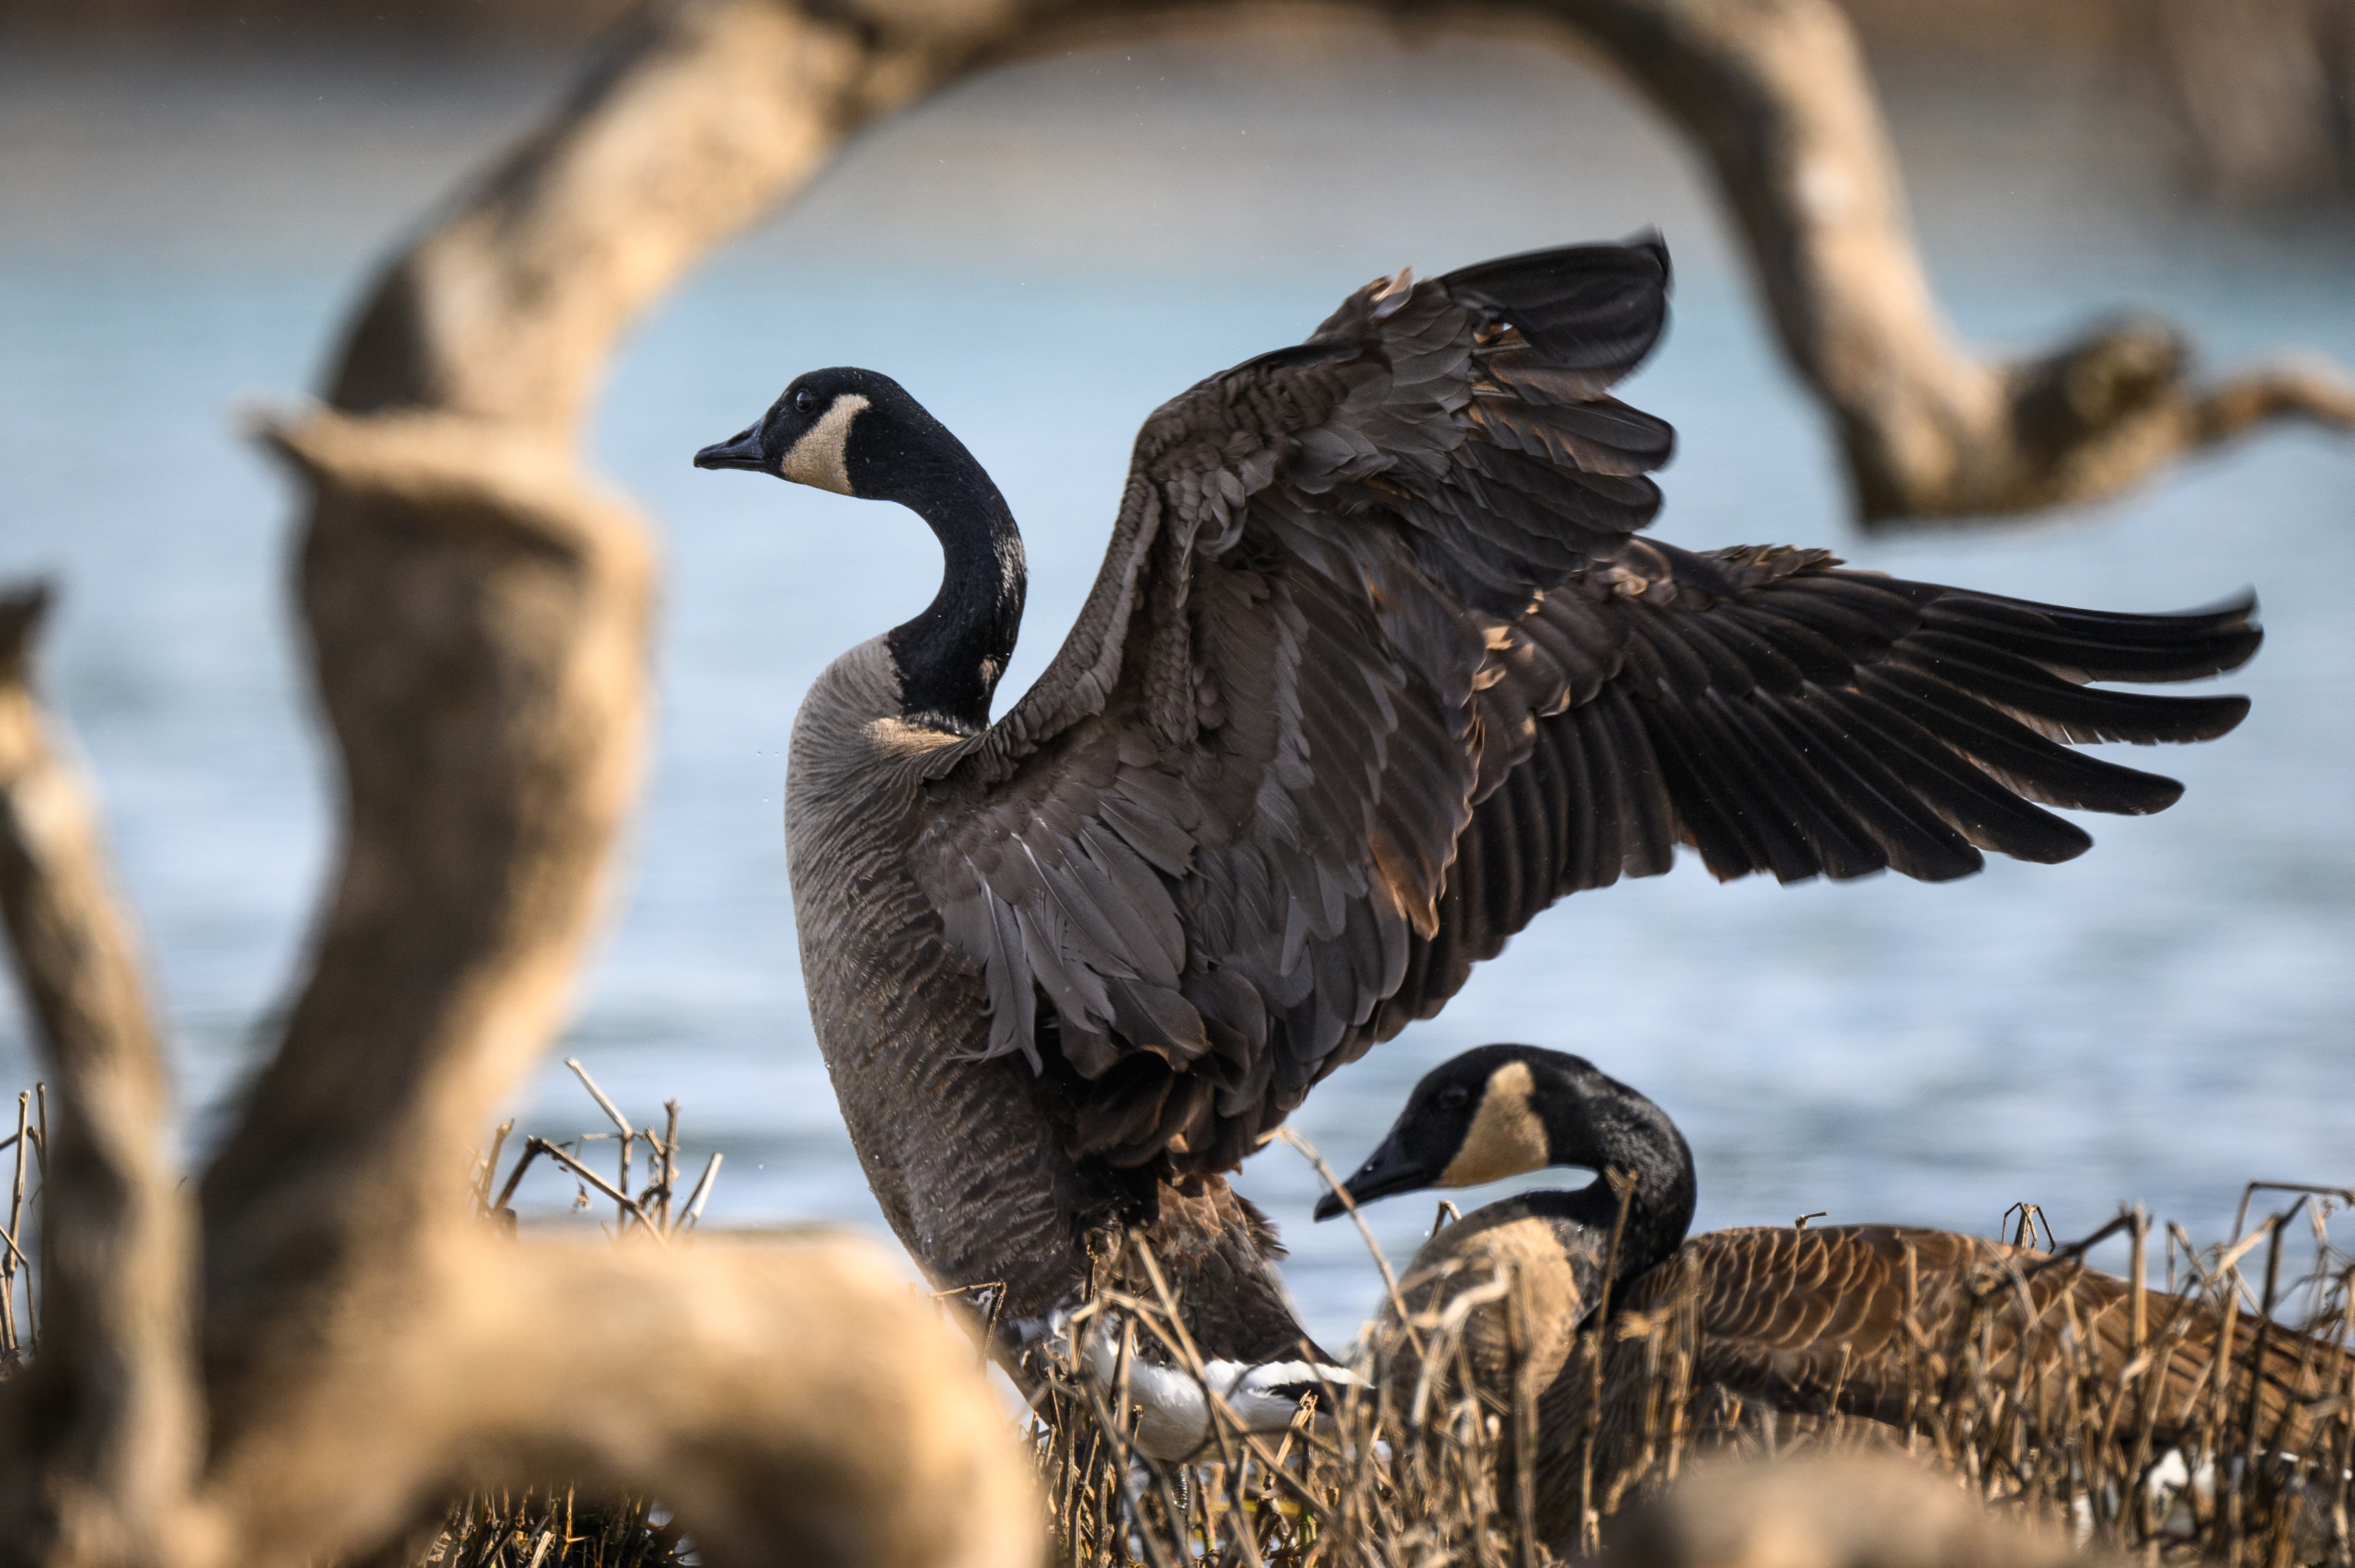 A Canada goose (Branta canadensis) flaps its wings to dry after rolling in the waters of Lake Springfield in Springfield, Missouri. Canada geese will roll in water, then flatly bang their wings on the water, then finish by waving the wings back and forth to dry, with a good ruffling of feathers for good measure.

Canada geese are particularly fastidious about keeping their feathers clean and dry, pulling dirt and water off each feather using the ridges on their mandibles. A good shake and ruffling of their feathers will get them dry. That is followed by oiling their feathers with their bill with oil from the base of their tail. The oil keeps the feathers insulated, dry, and free of parasites.